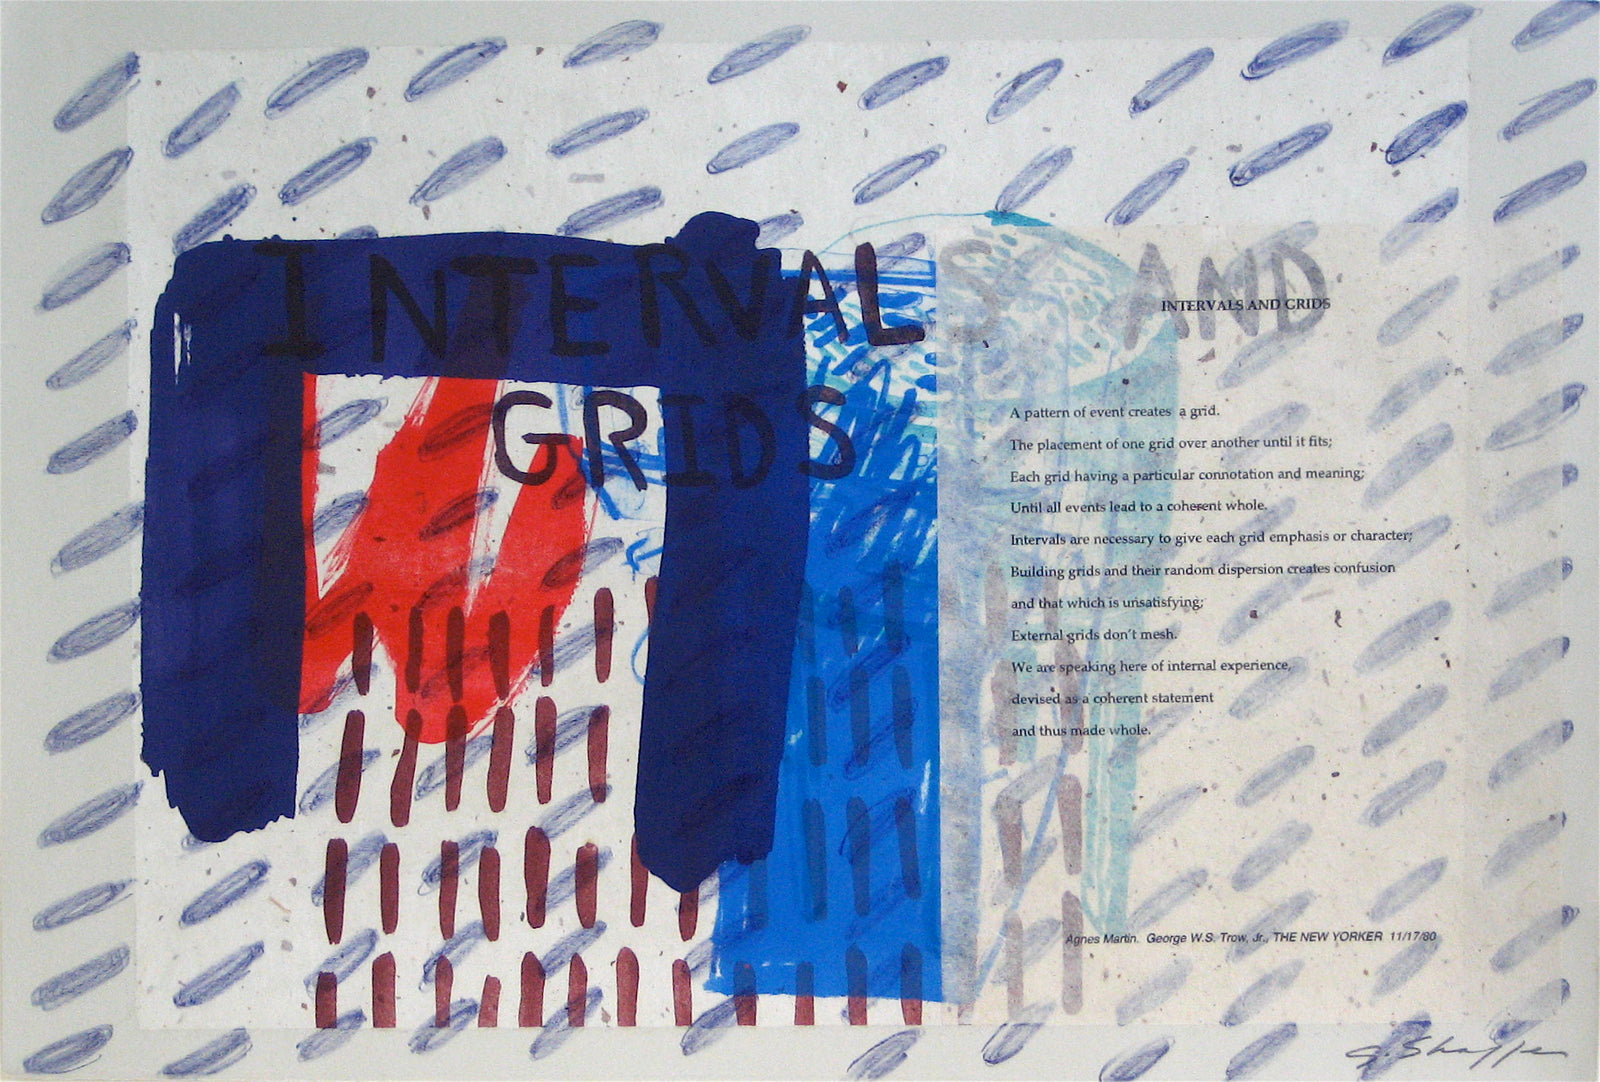 Abstract Print <br>1999 Lithograph, Chine Colle and Text <br><br>#11698